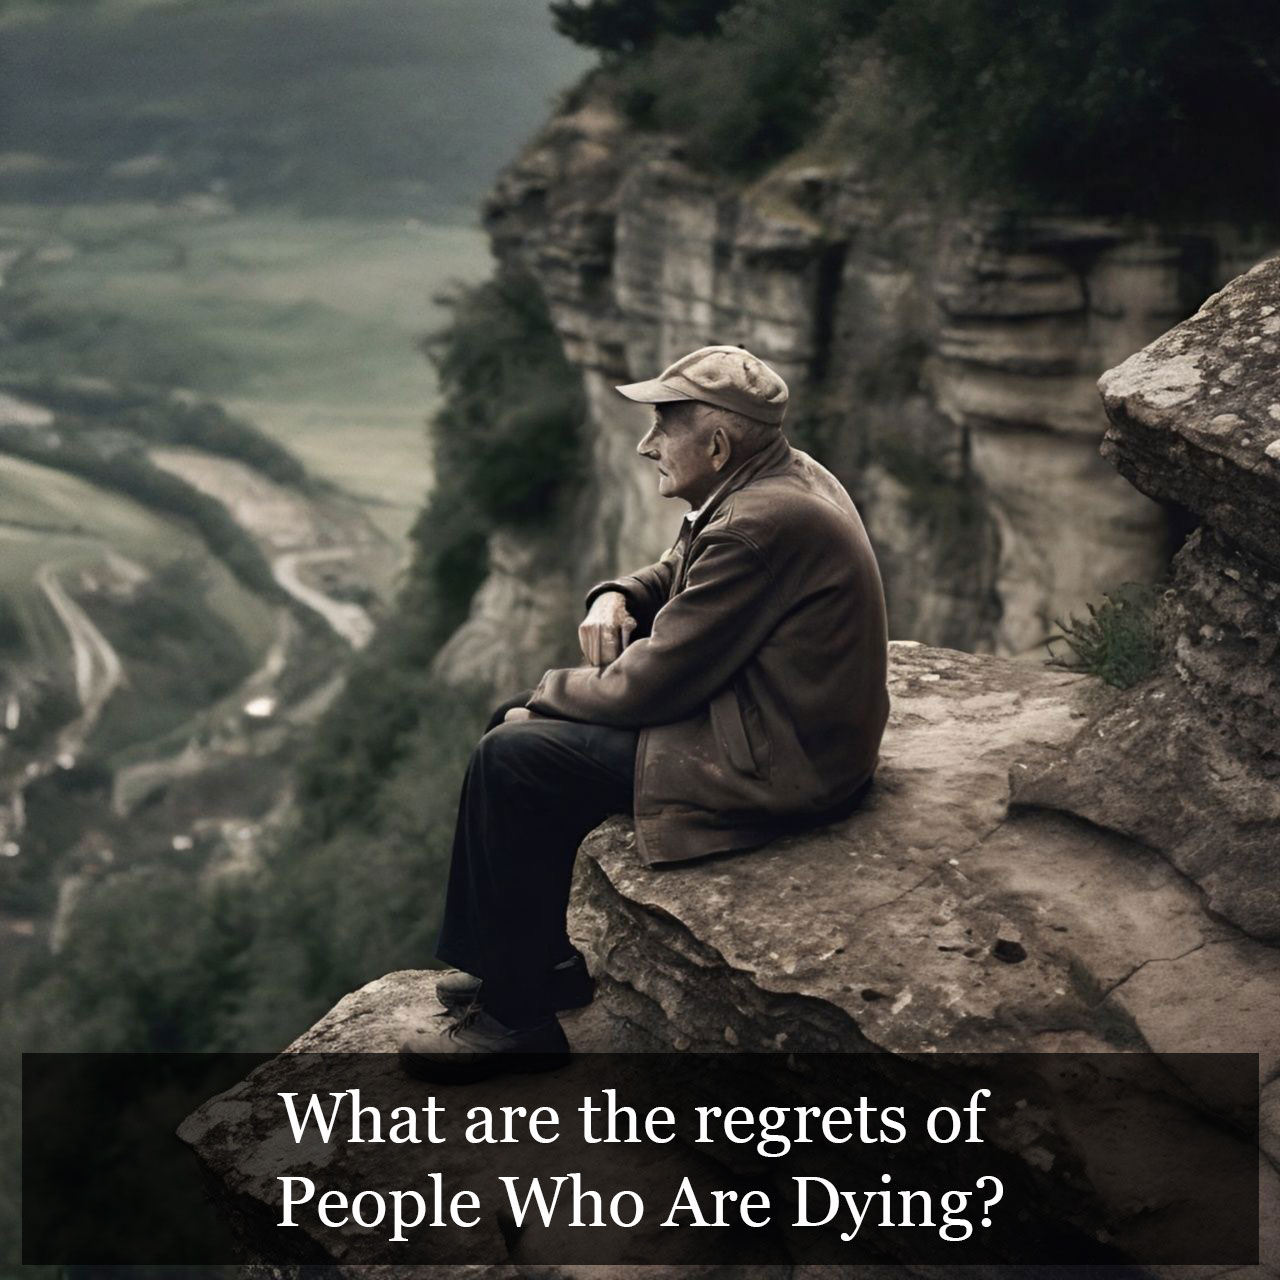 What are the regrets of People Who Are Dying?